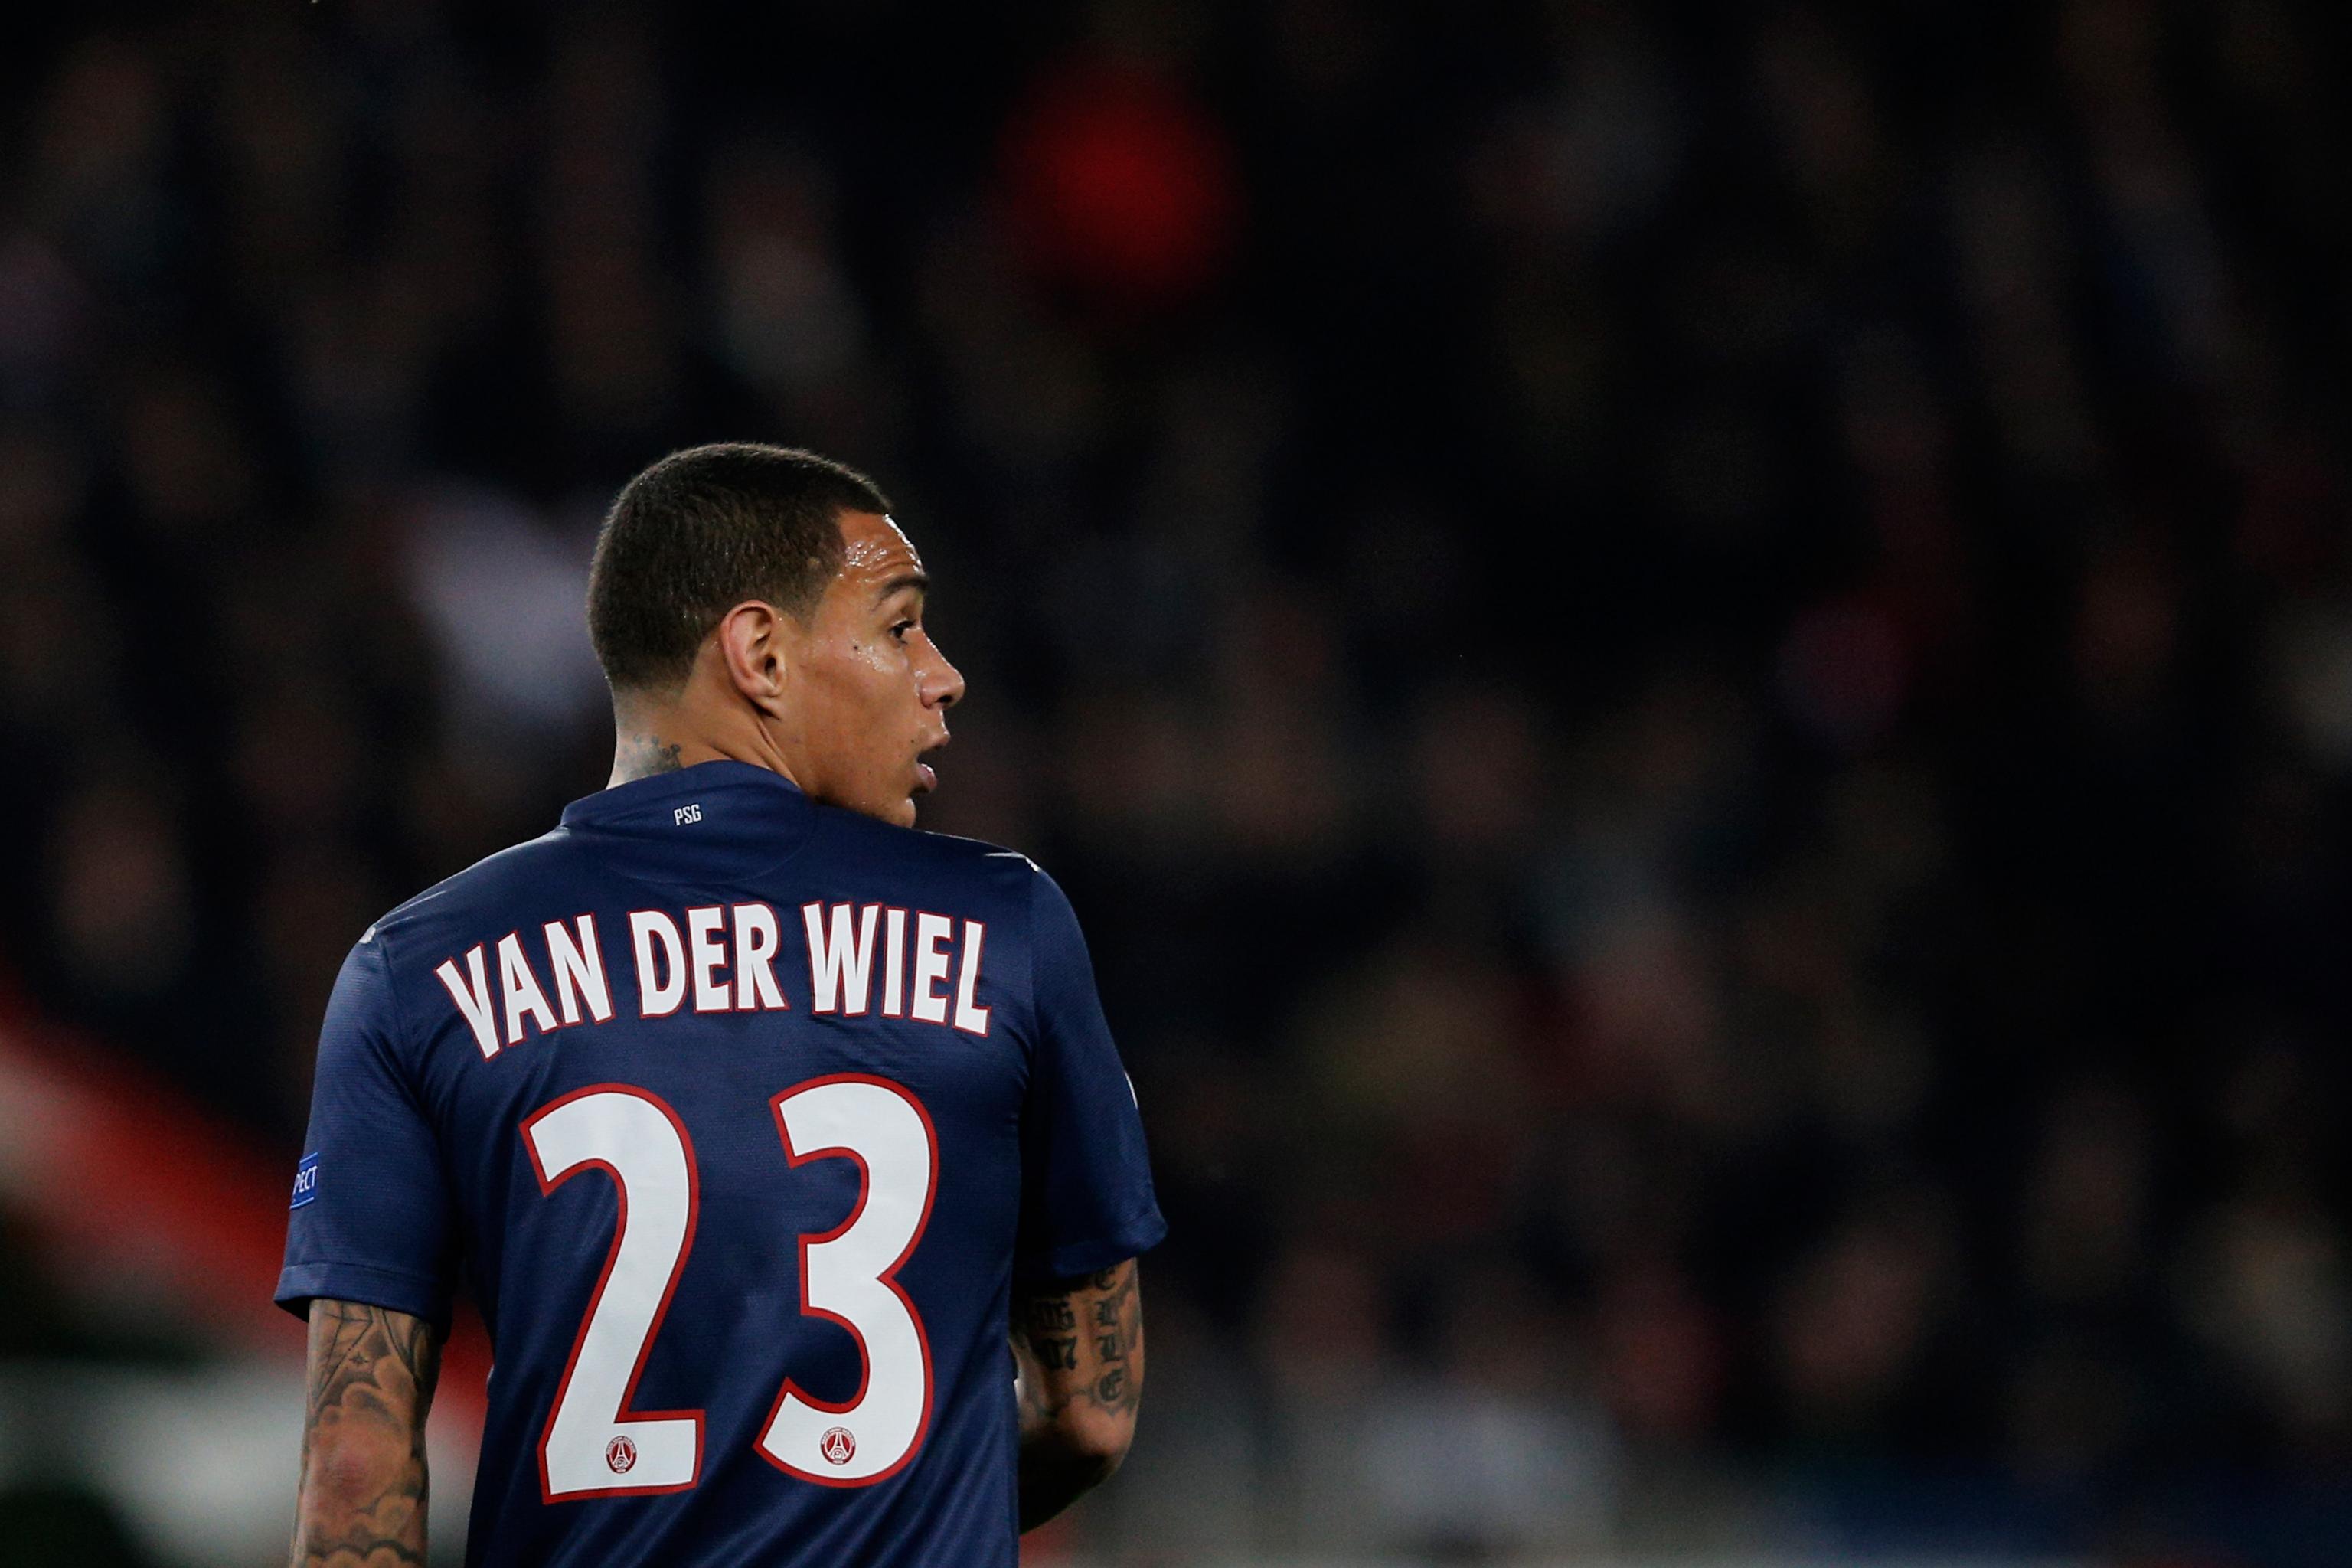 Gregory van der Wiel: 'I have no offers from other clubs' - Sports Mole